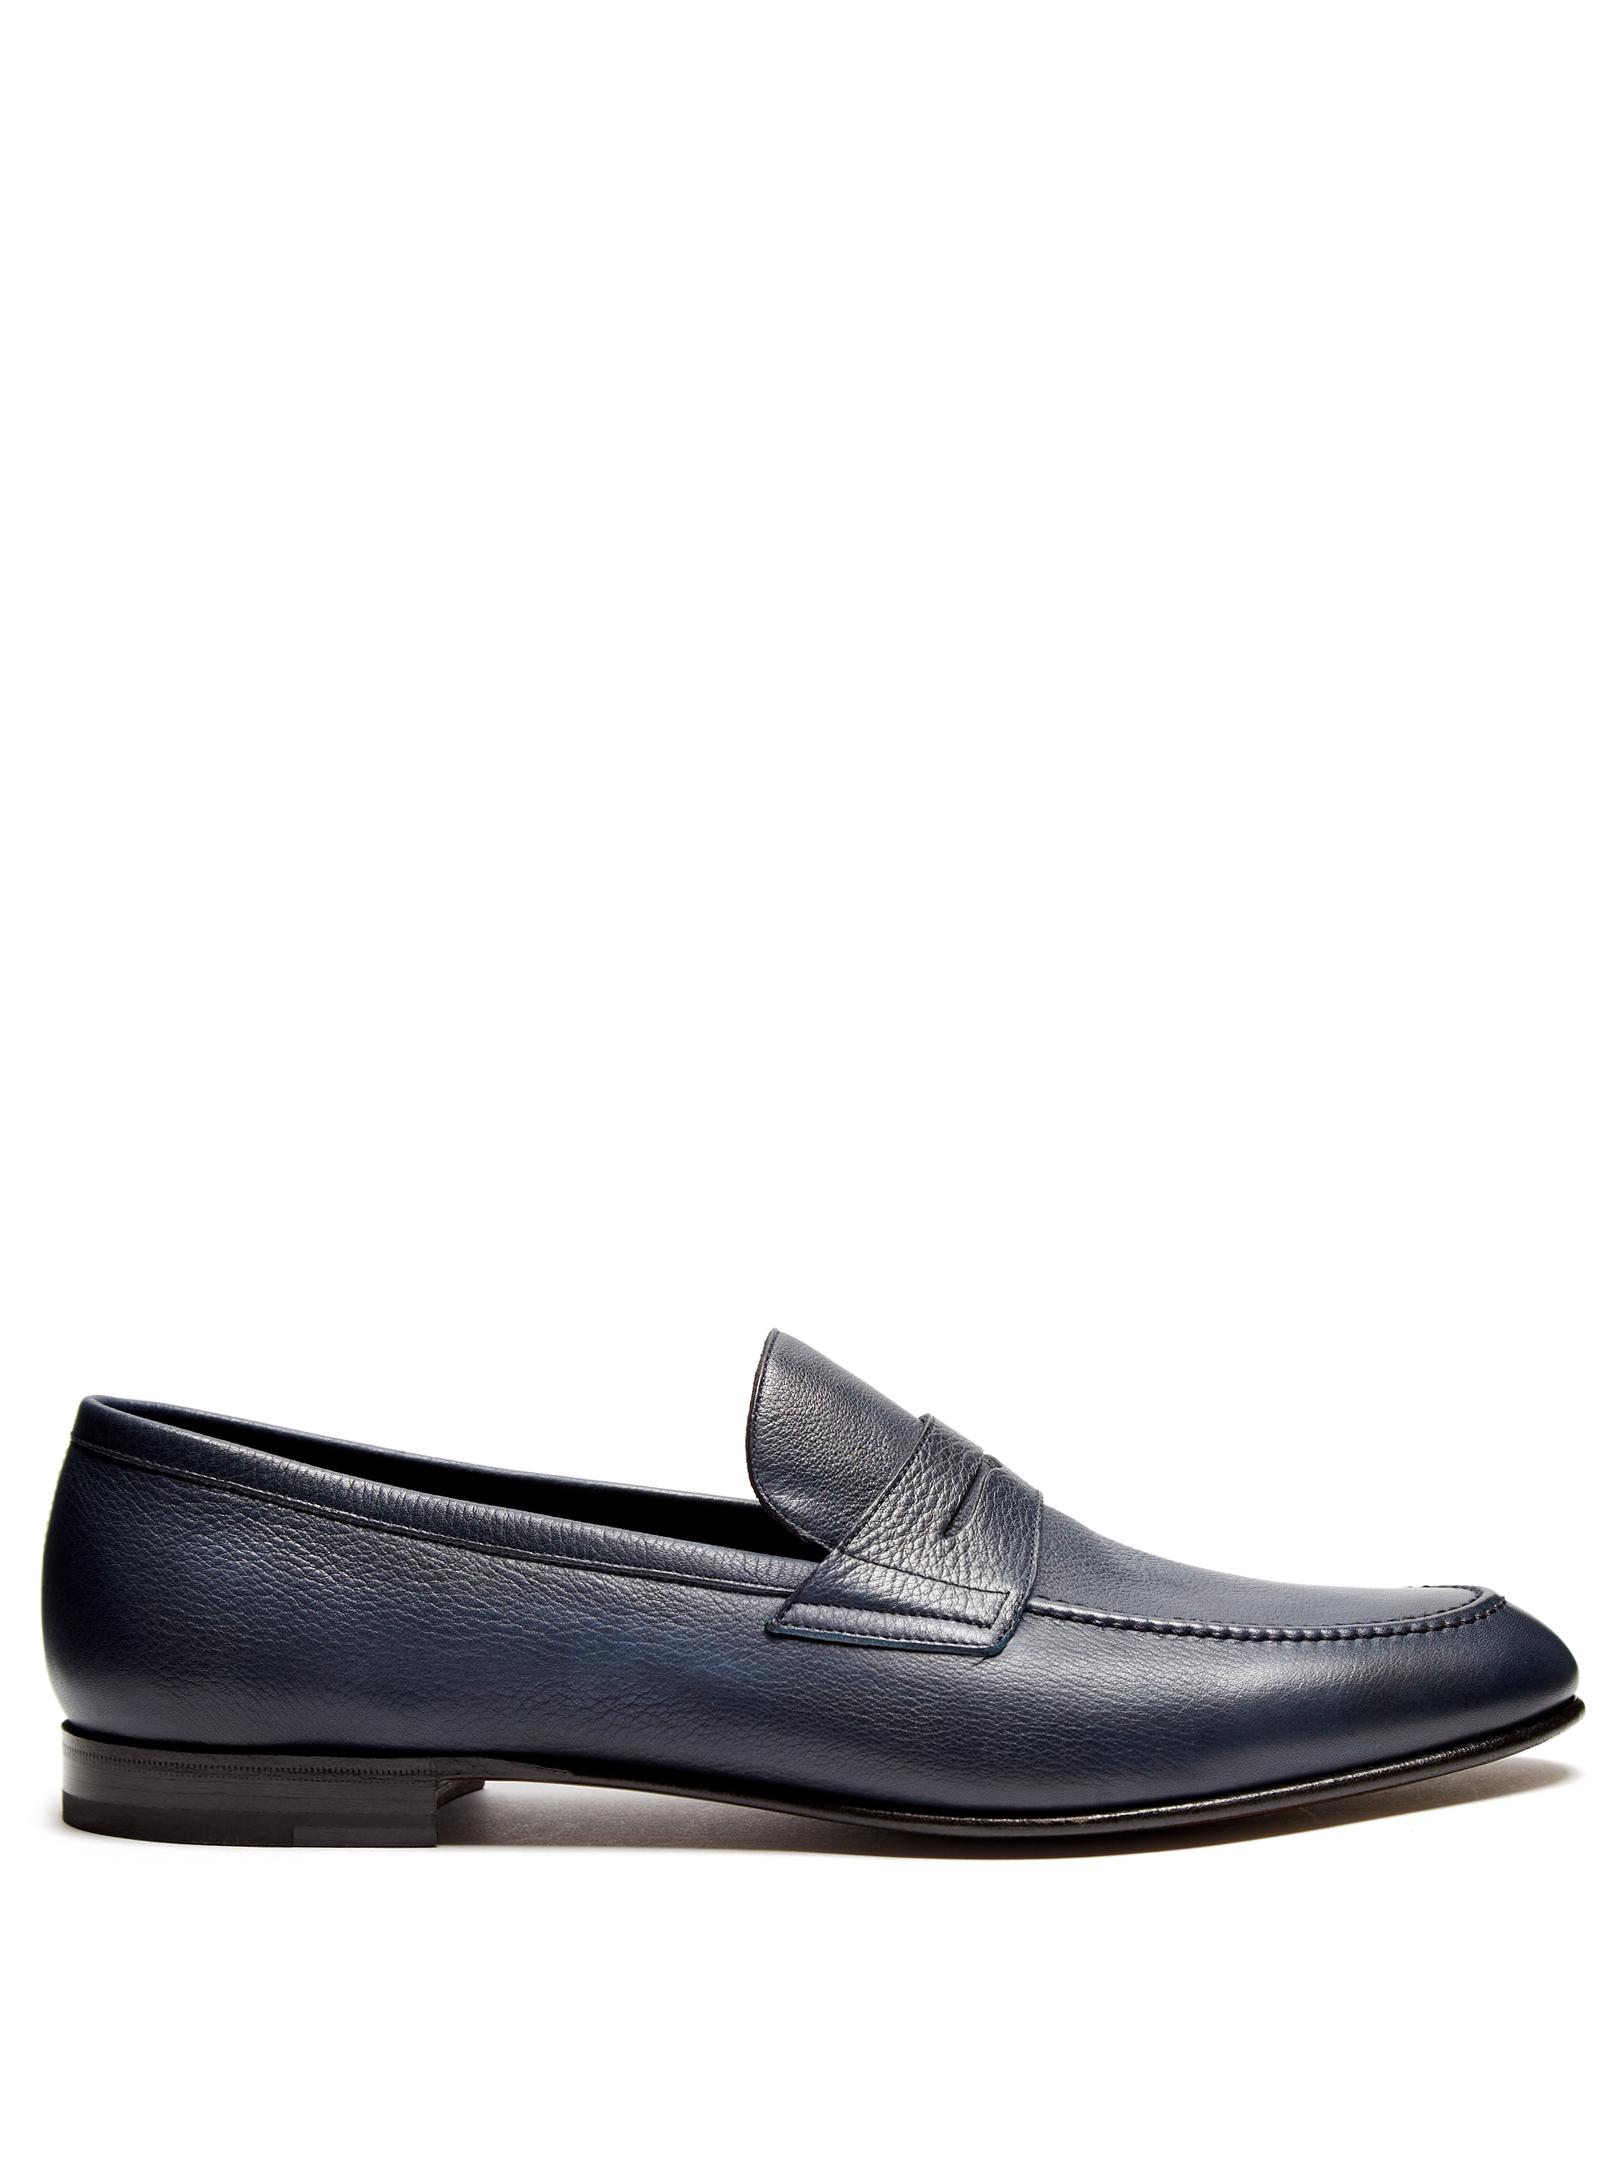 Lyst - Fratelli Rossetti Montana Leather Loafers in Blue for Men